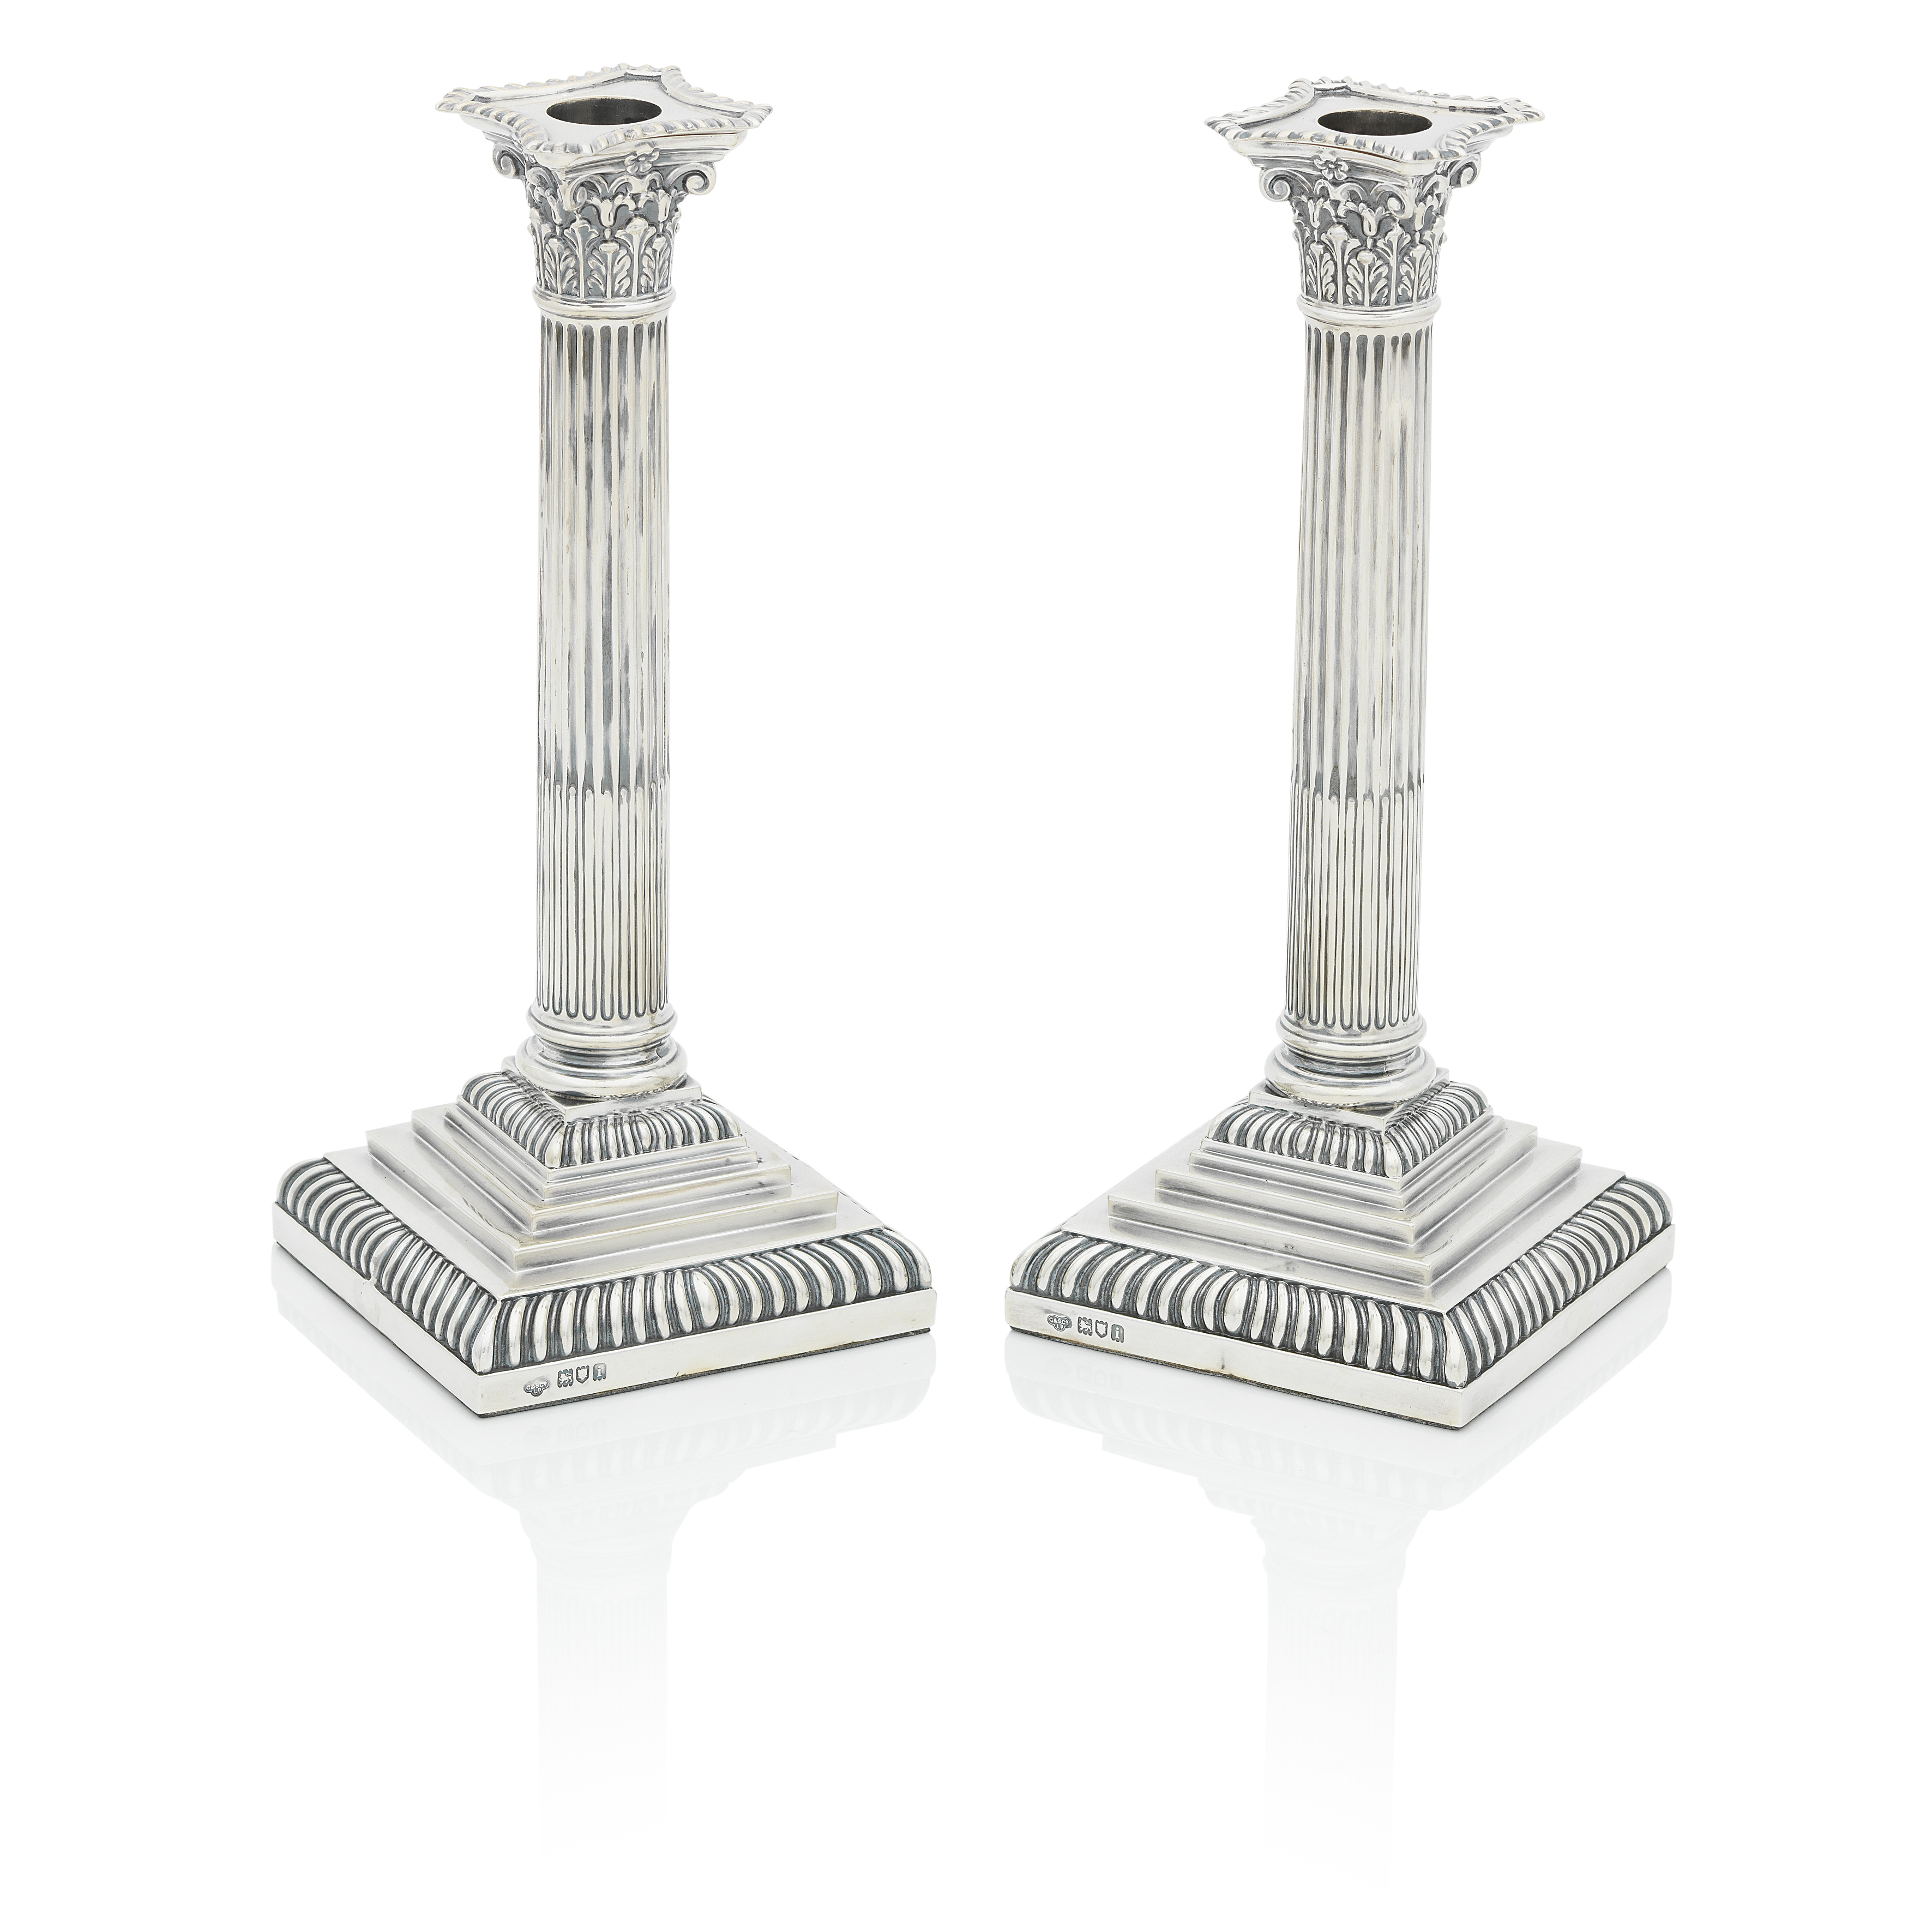 A Pair of Edwardian Silver Candlesticks By the Goldsmiths and silversmiths company, London, 1904